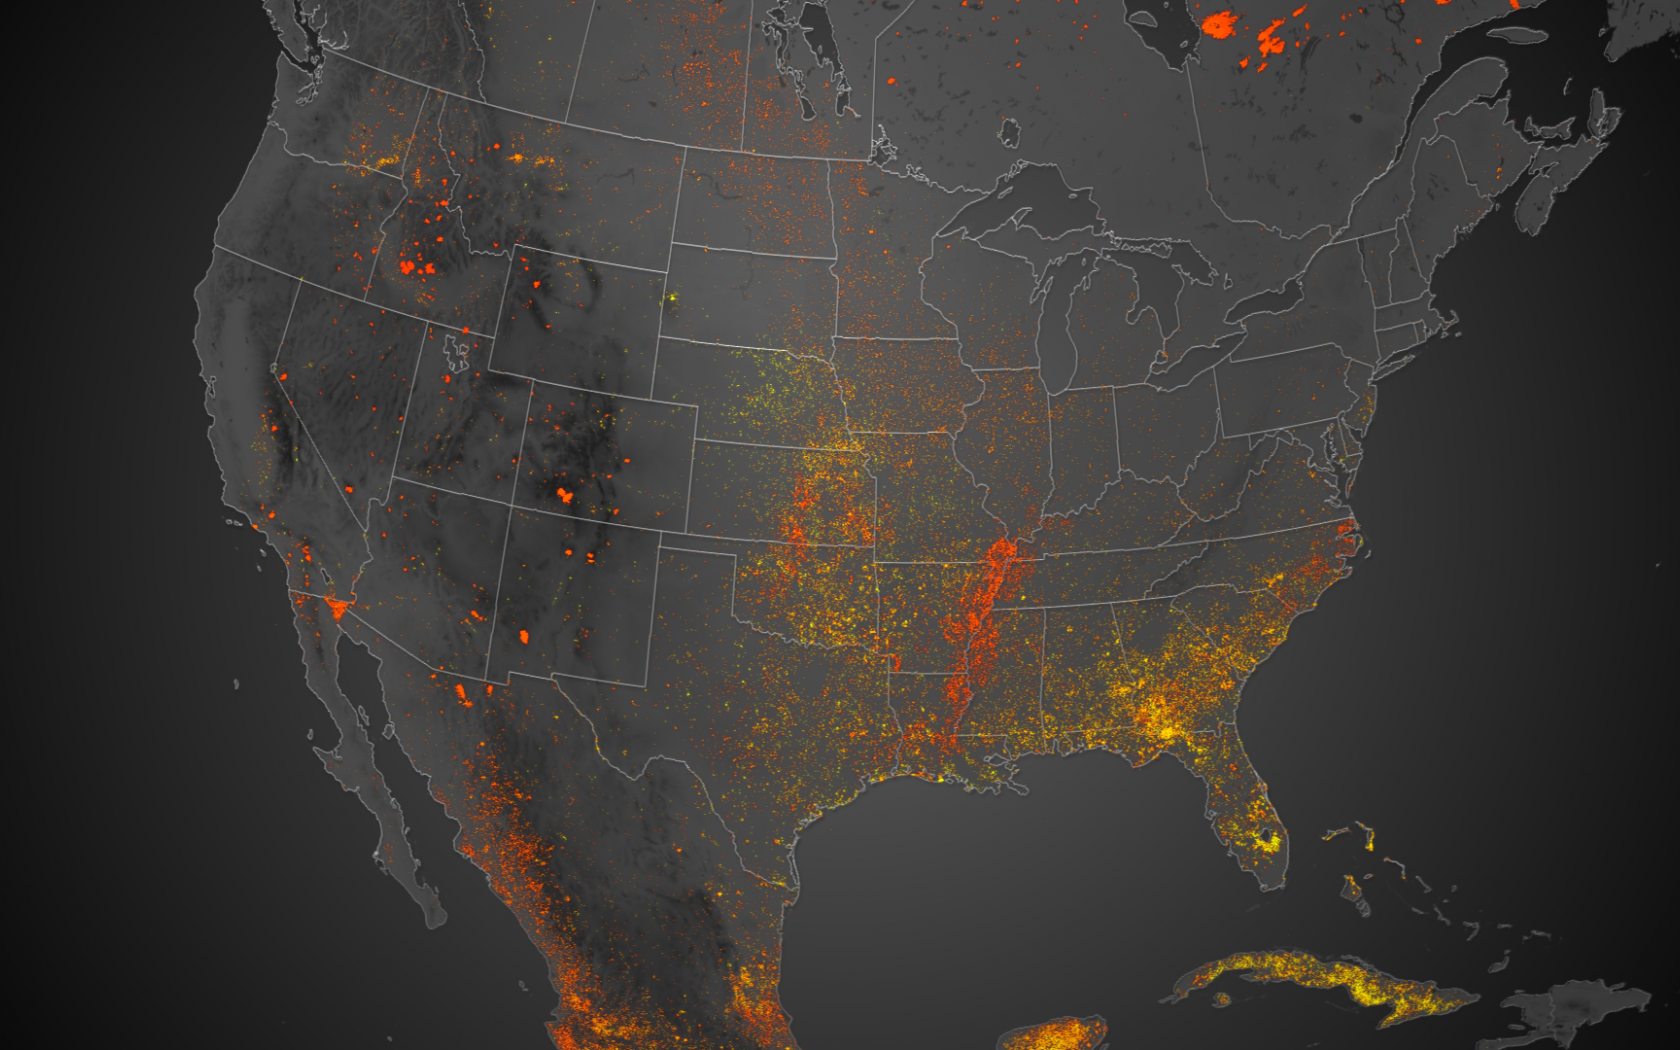 Free download Continent on Fire Map Shows 6 Months of Wildfires